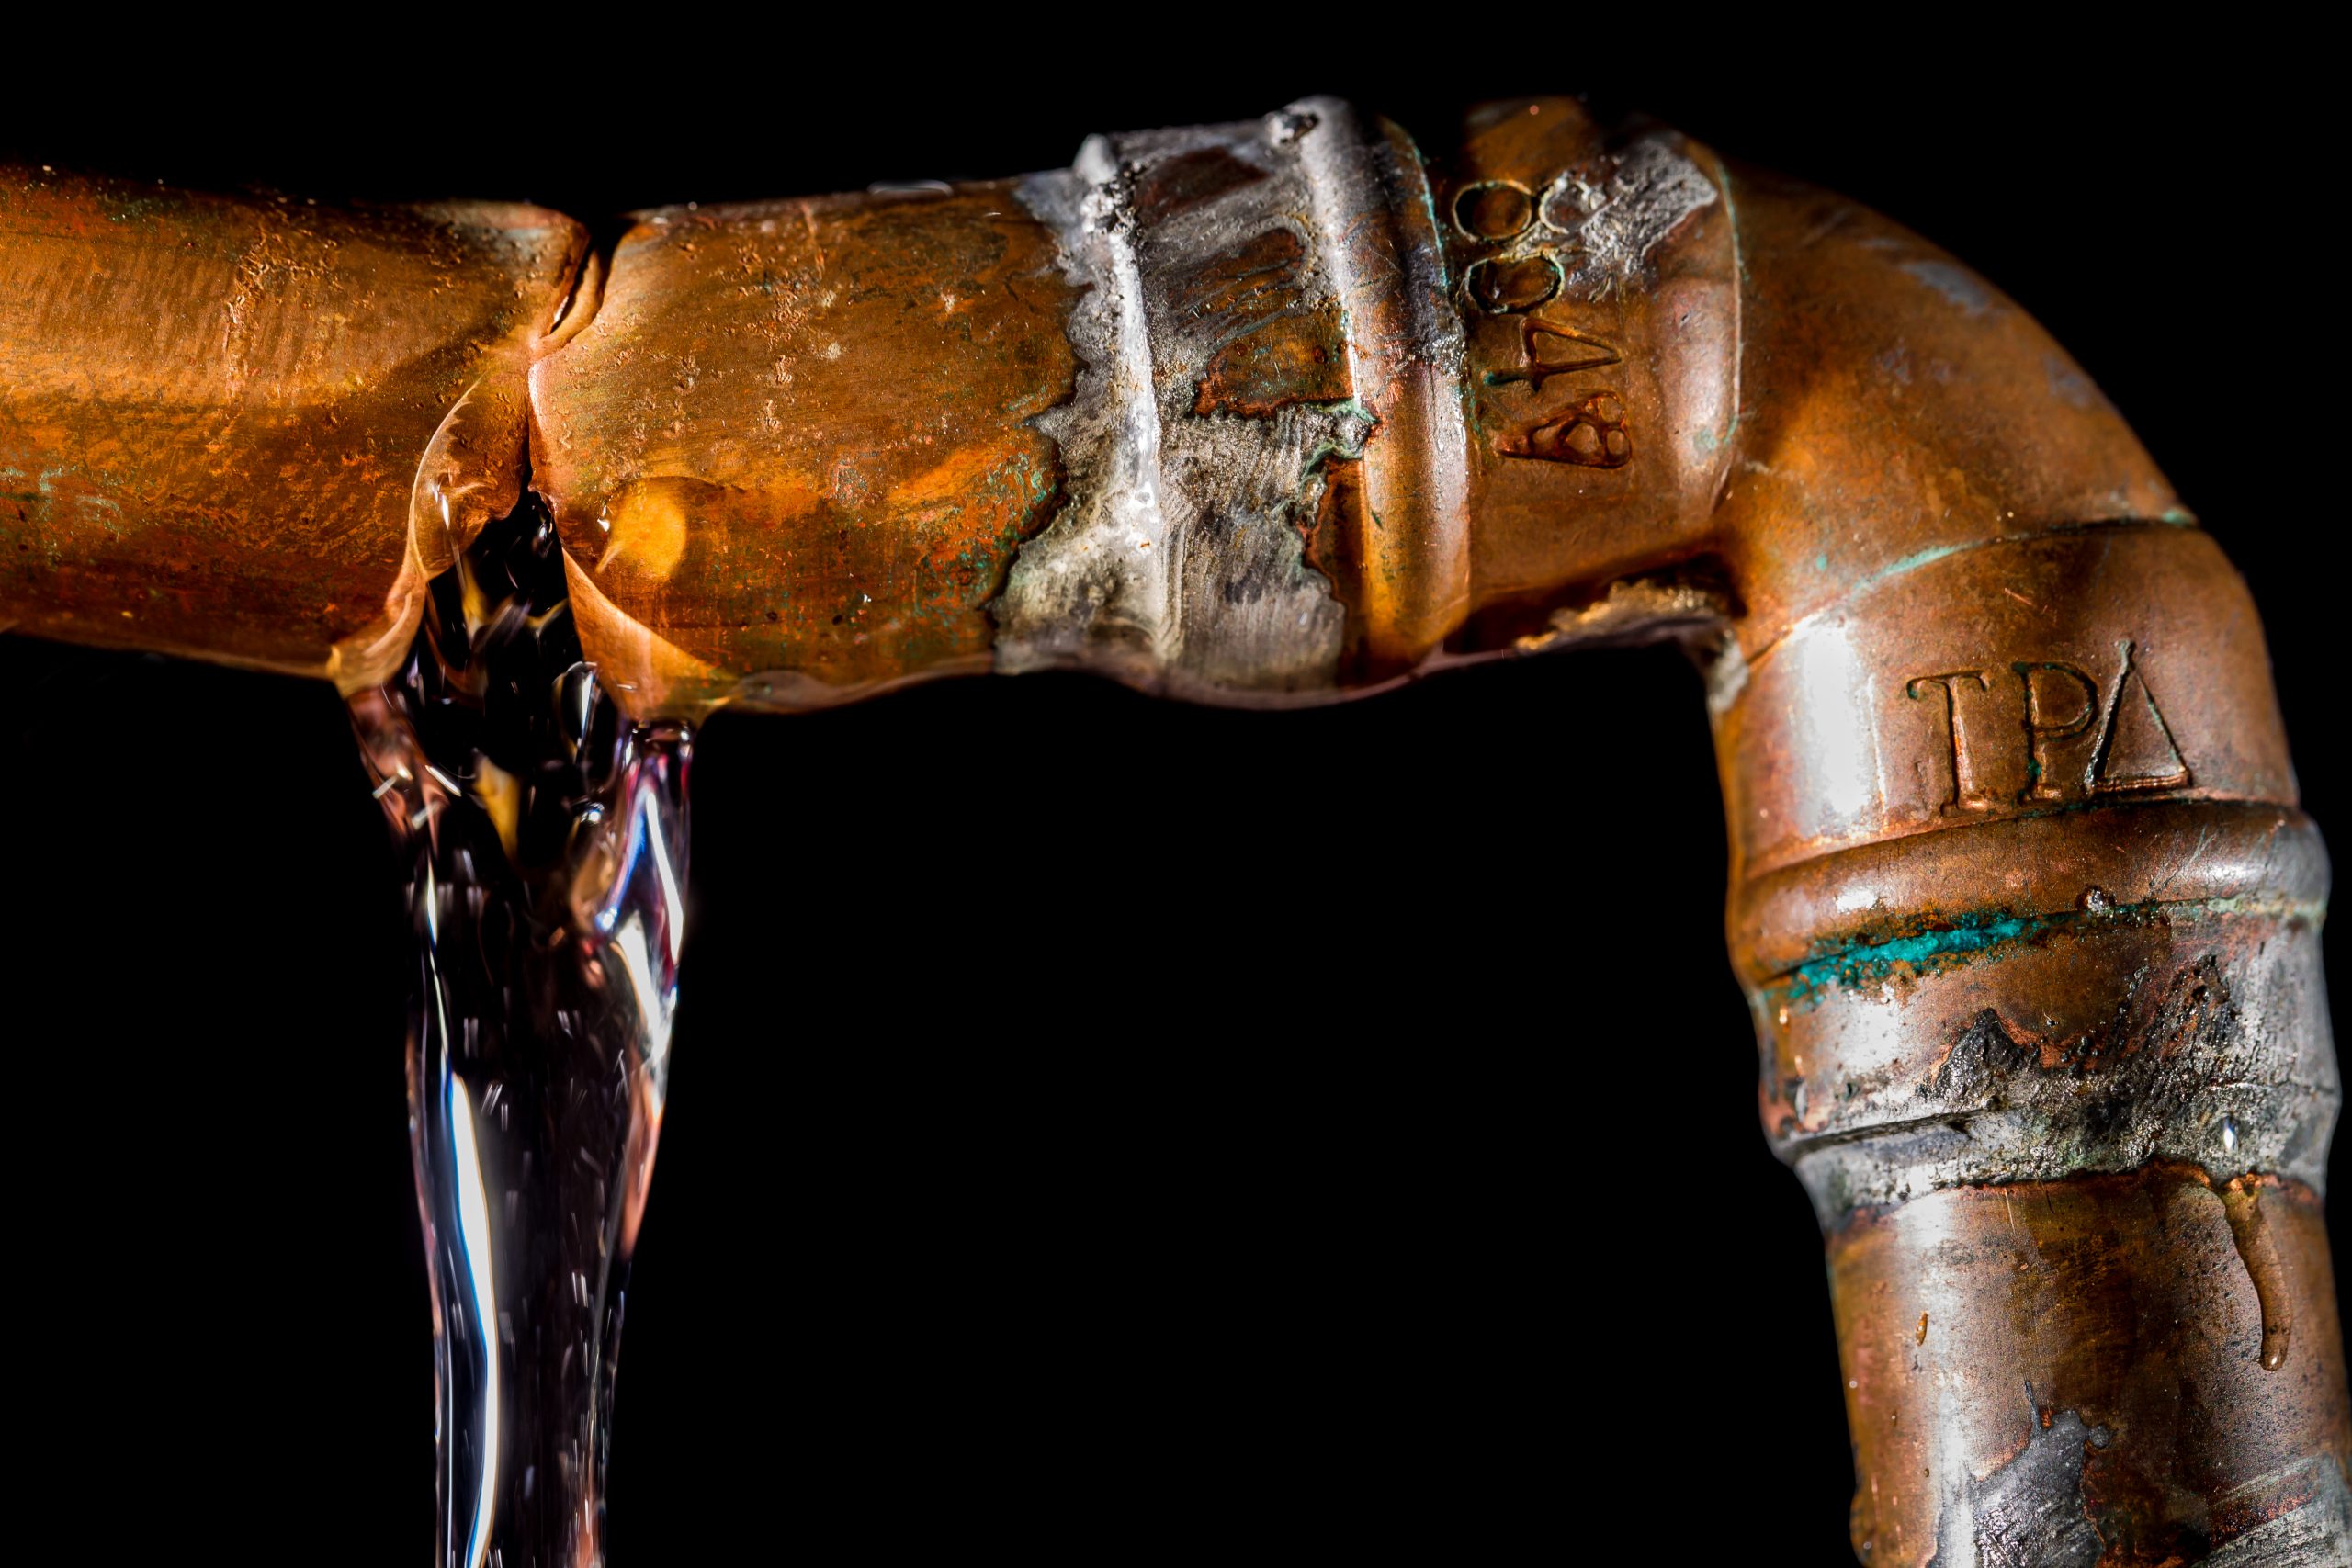 How to stop pipes from freezing during the winter